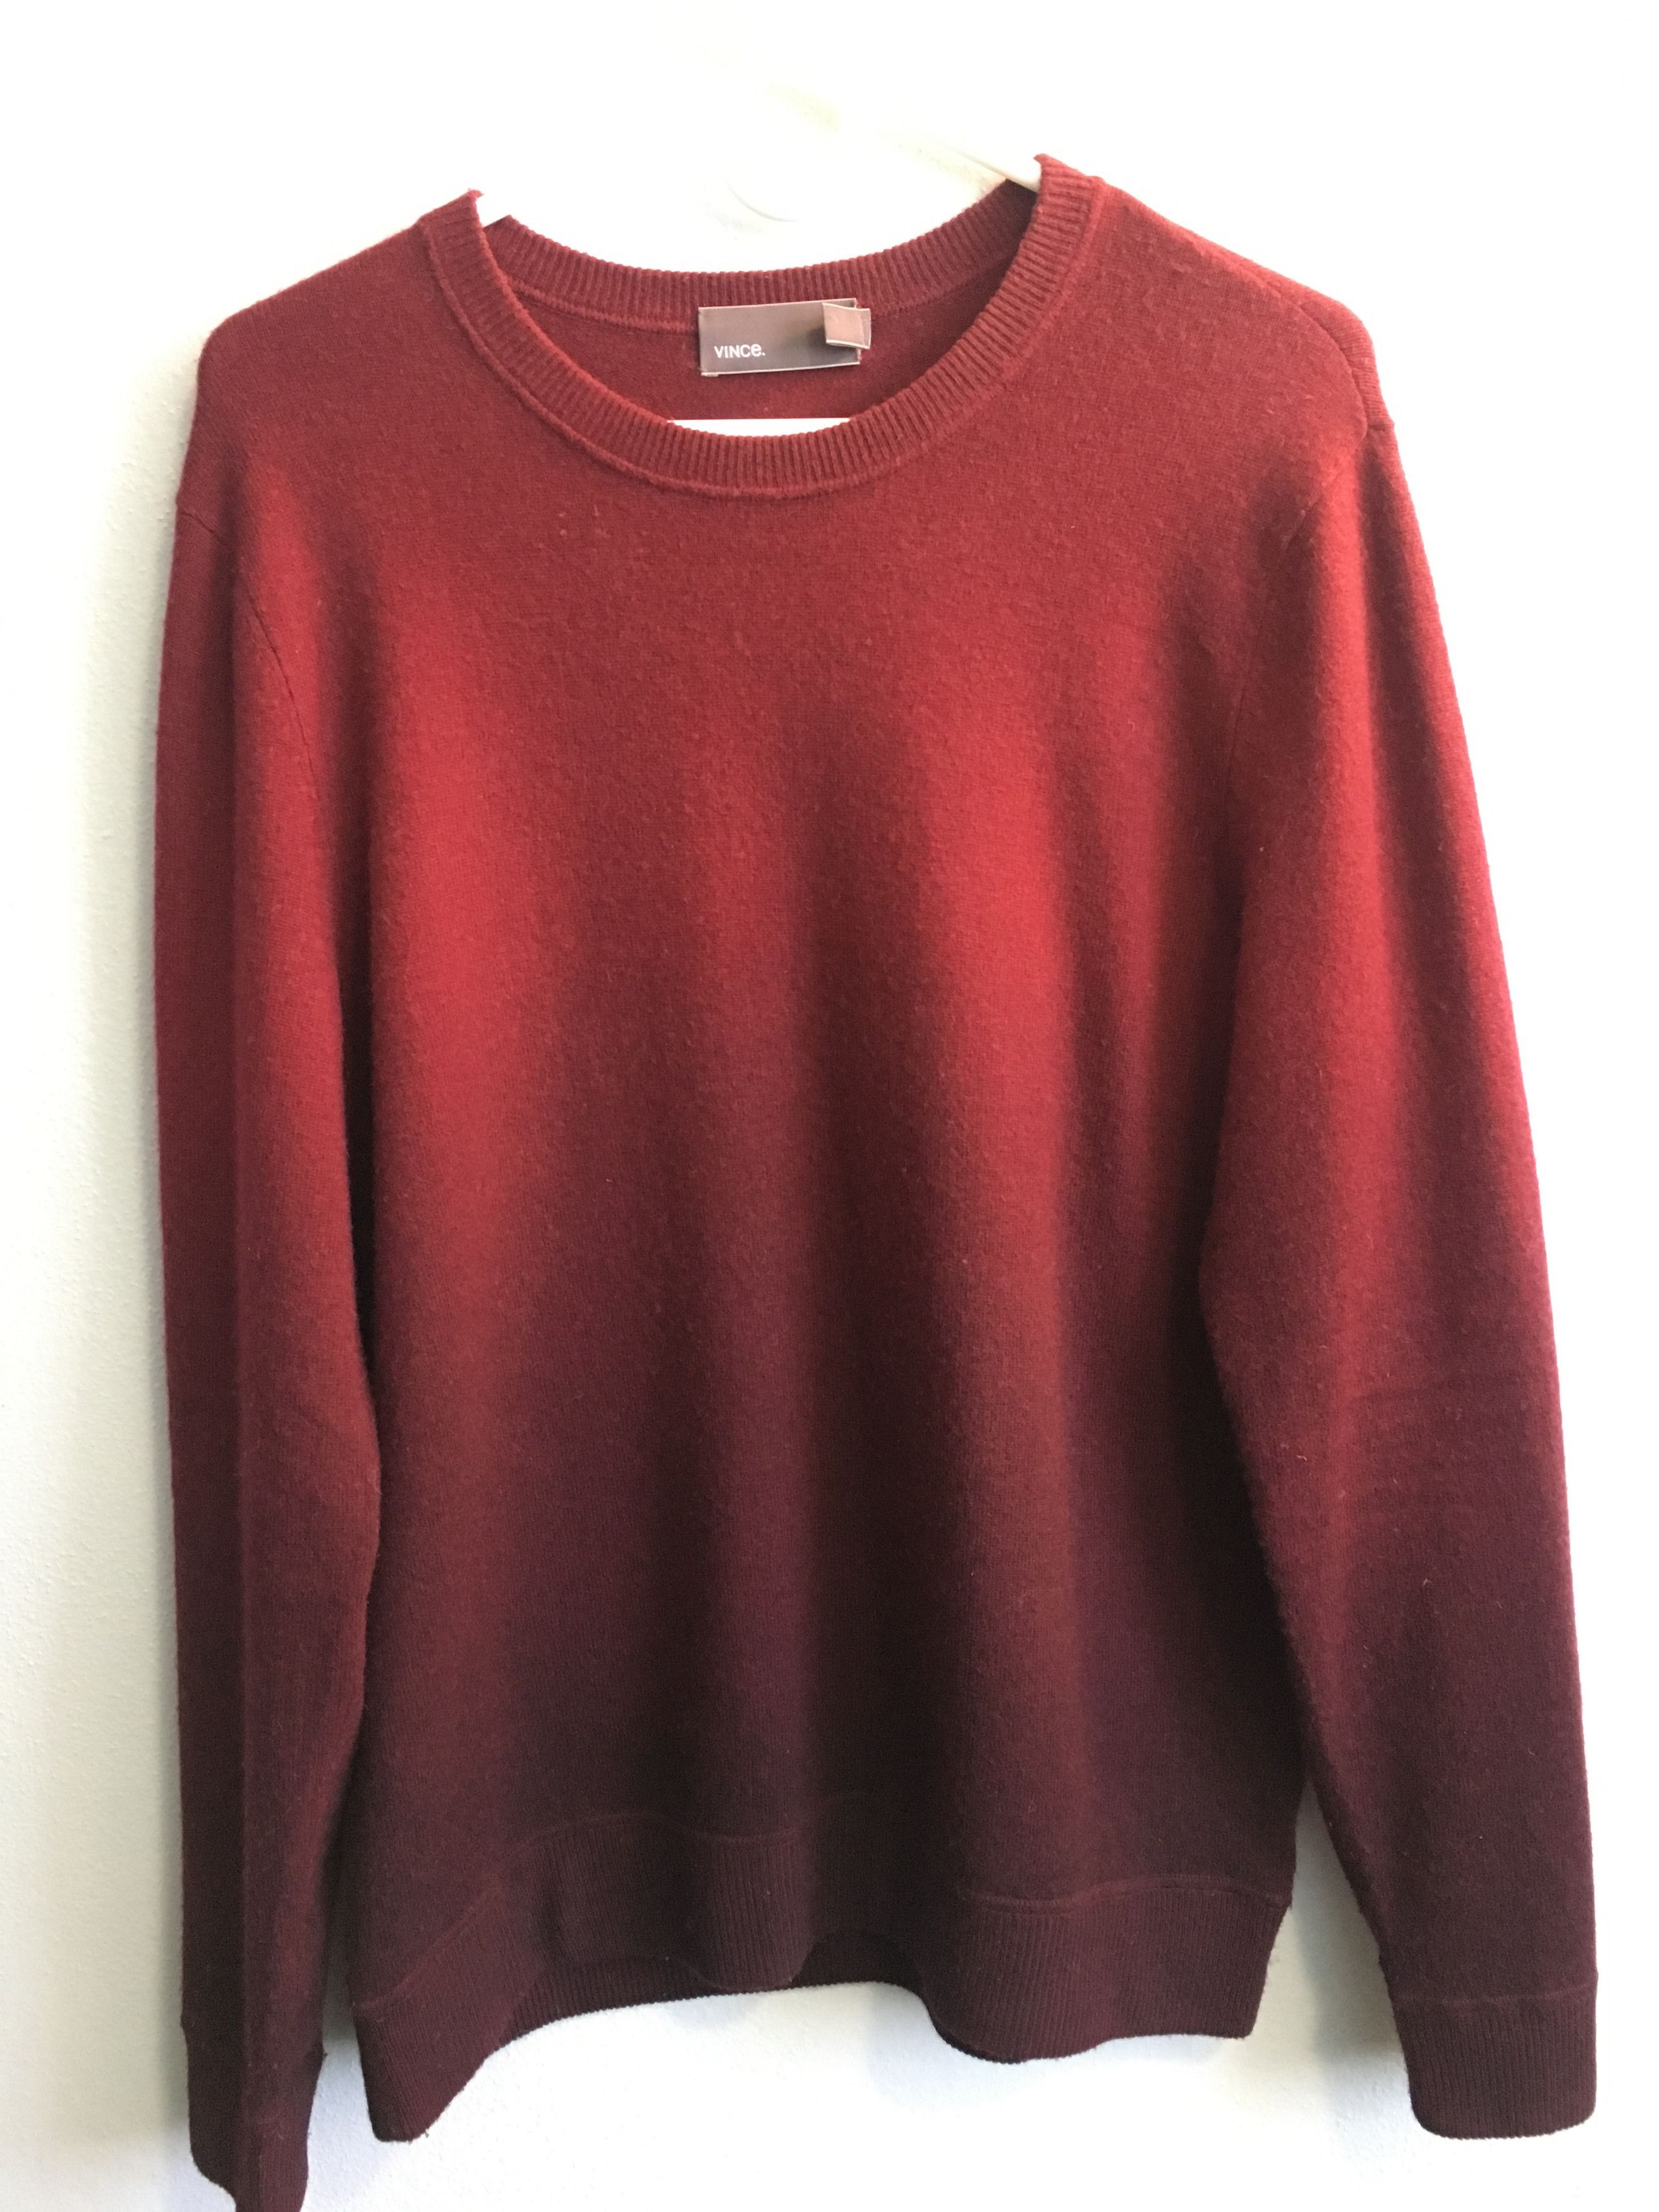 Vince $275 Wool/Cashmere Fading Sweater | Grailed